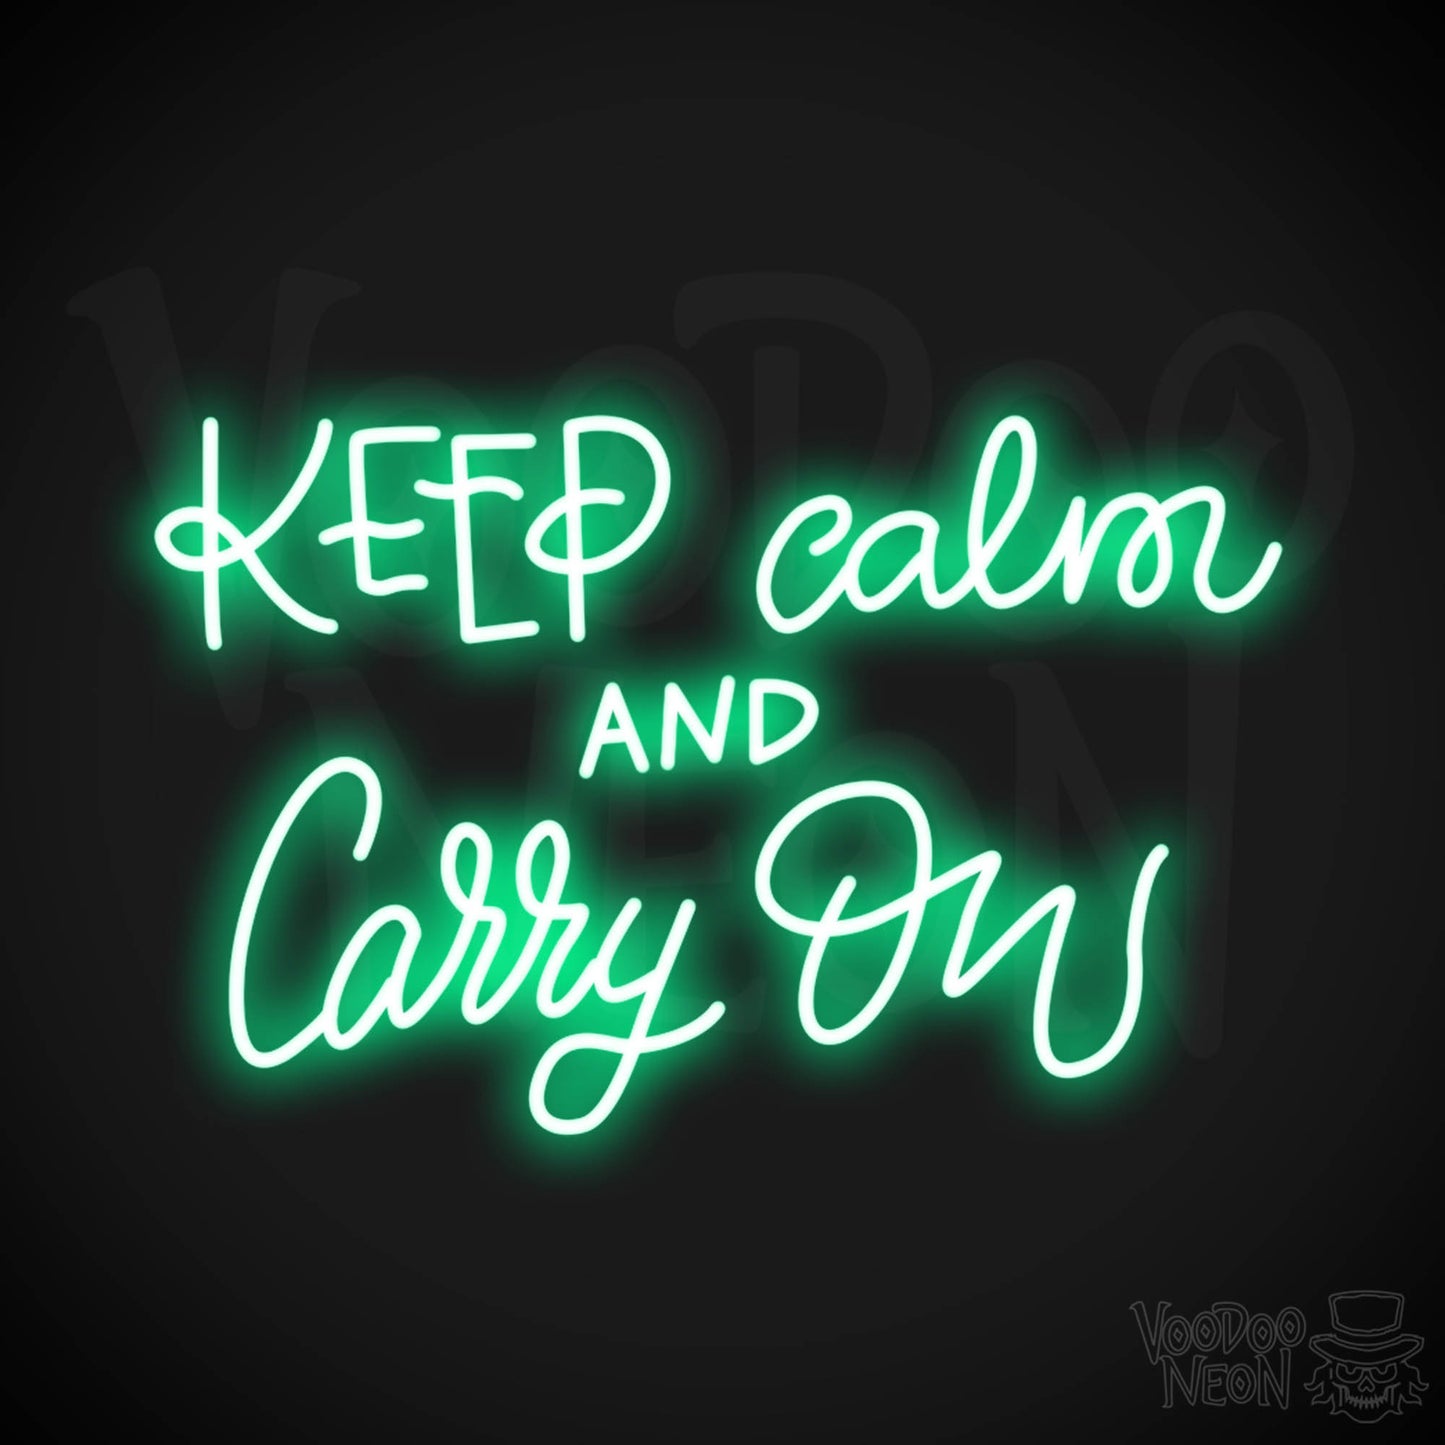 Keep Calm And Carry On Sign - Neon Sign - LED Wall Art - Color Green